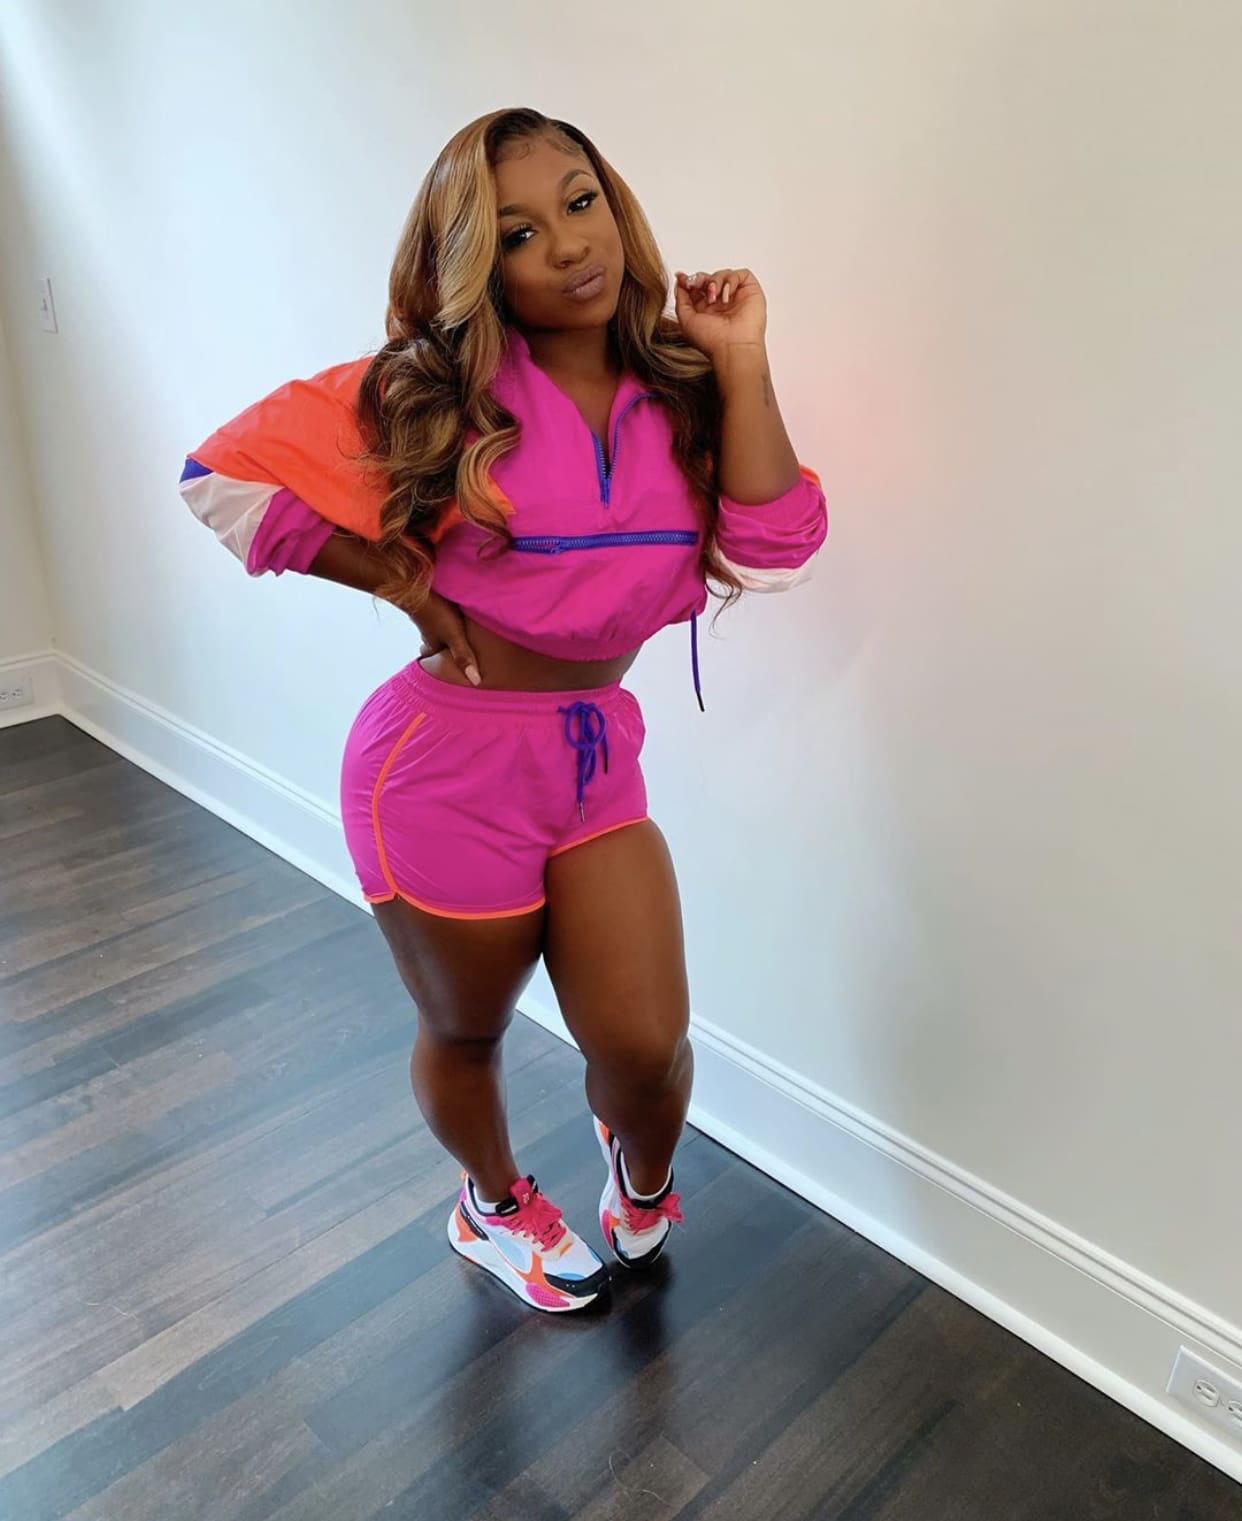 Reginae Carter Celebrates The Birthday Of Her BFF: 'My Brother From Another Mother'